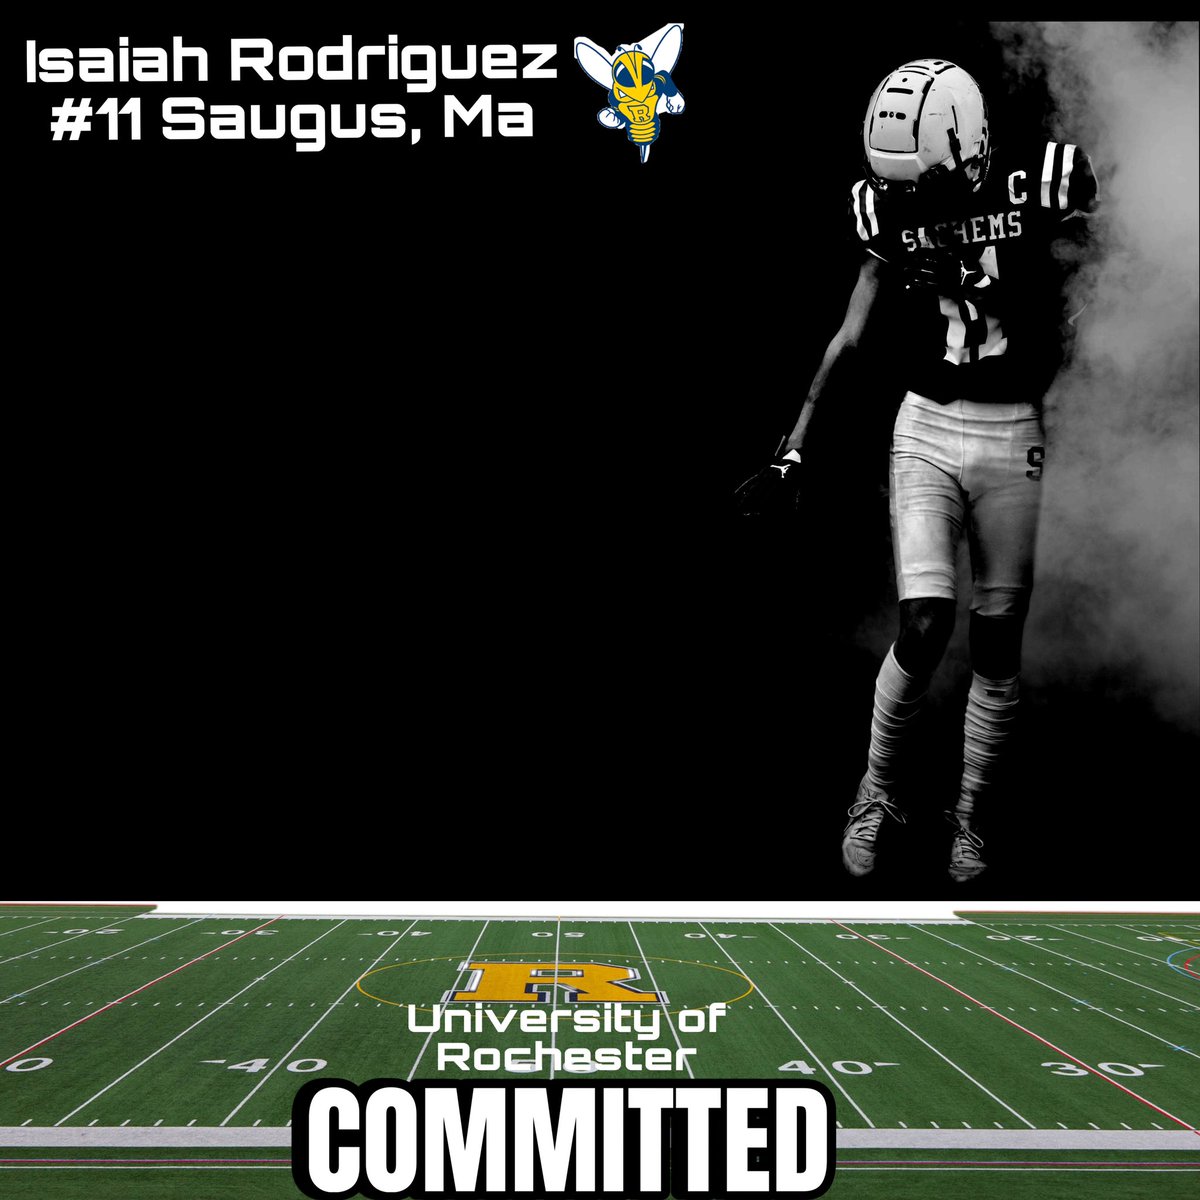 After a great conversation with @TheCoachGriggs I want to announce my commitment to university of Rochester! To further my academic and football career want to thank all my coaches for giving me this opportunity!! @gbluestein @SaugusSachemsAD